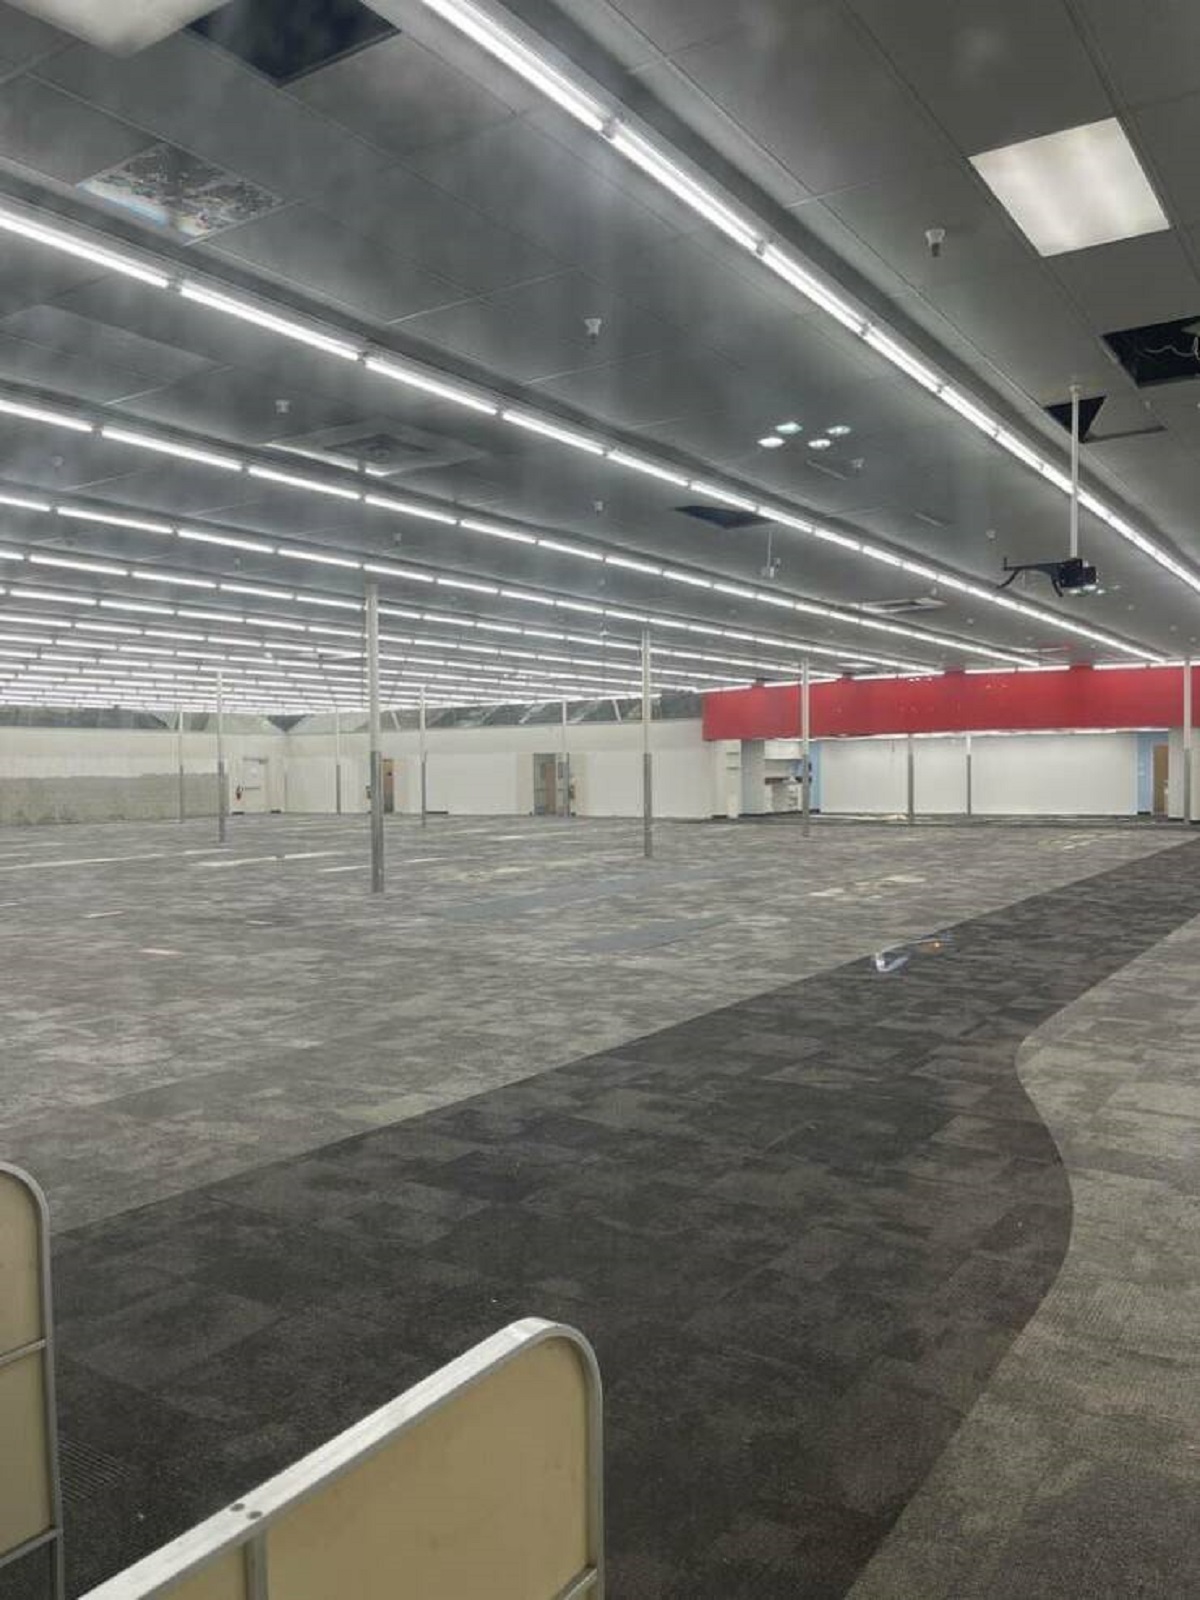 This is what a completely empty CVS store looks like: